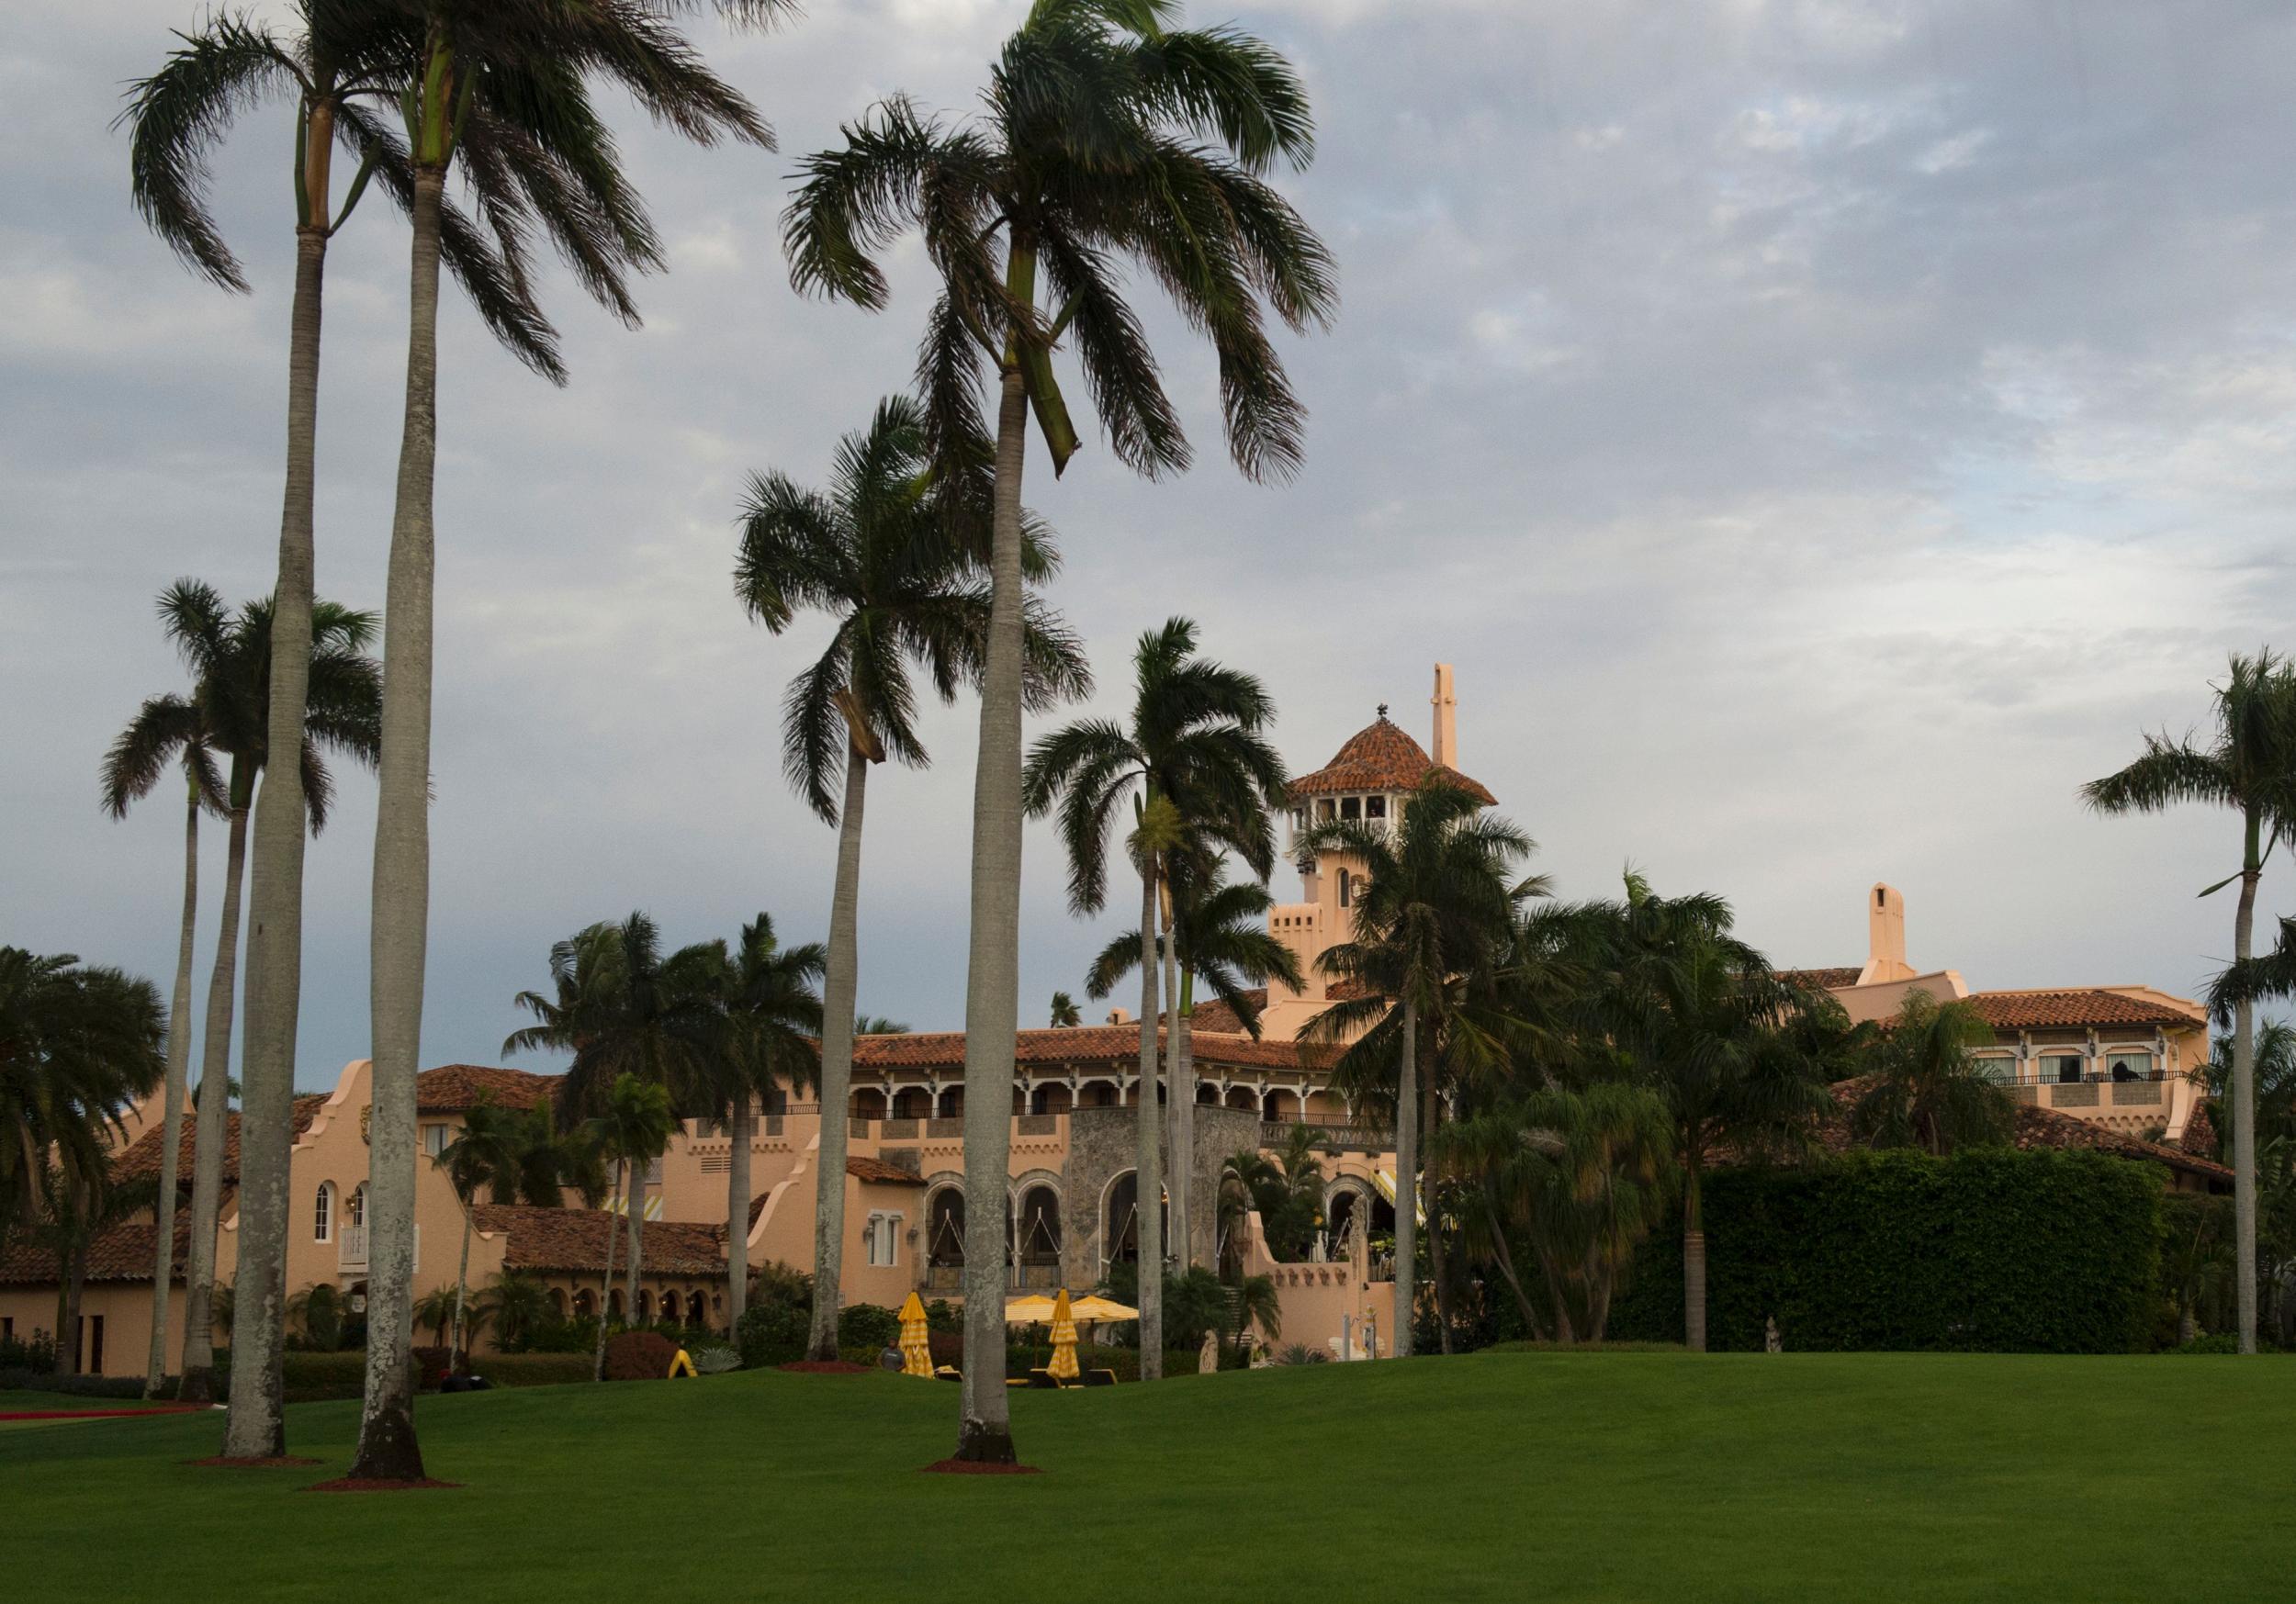 Mr Trump's Palm Beach resort could be partially submerged as water rises